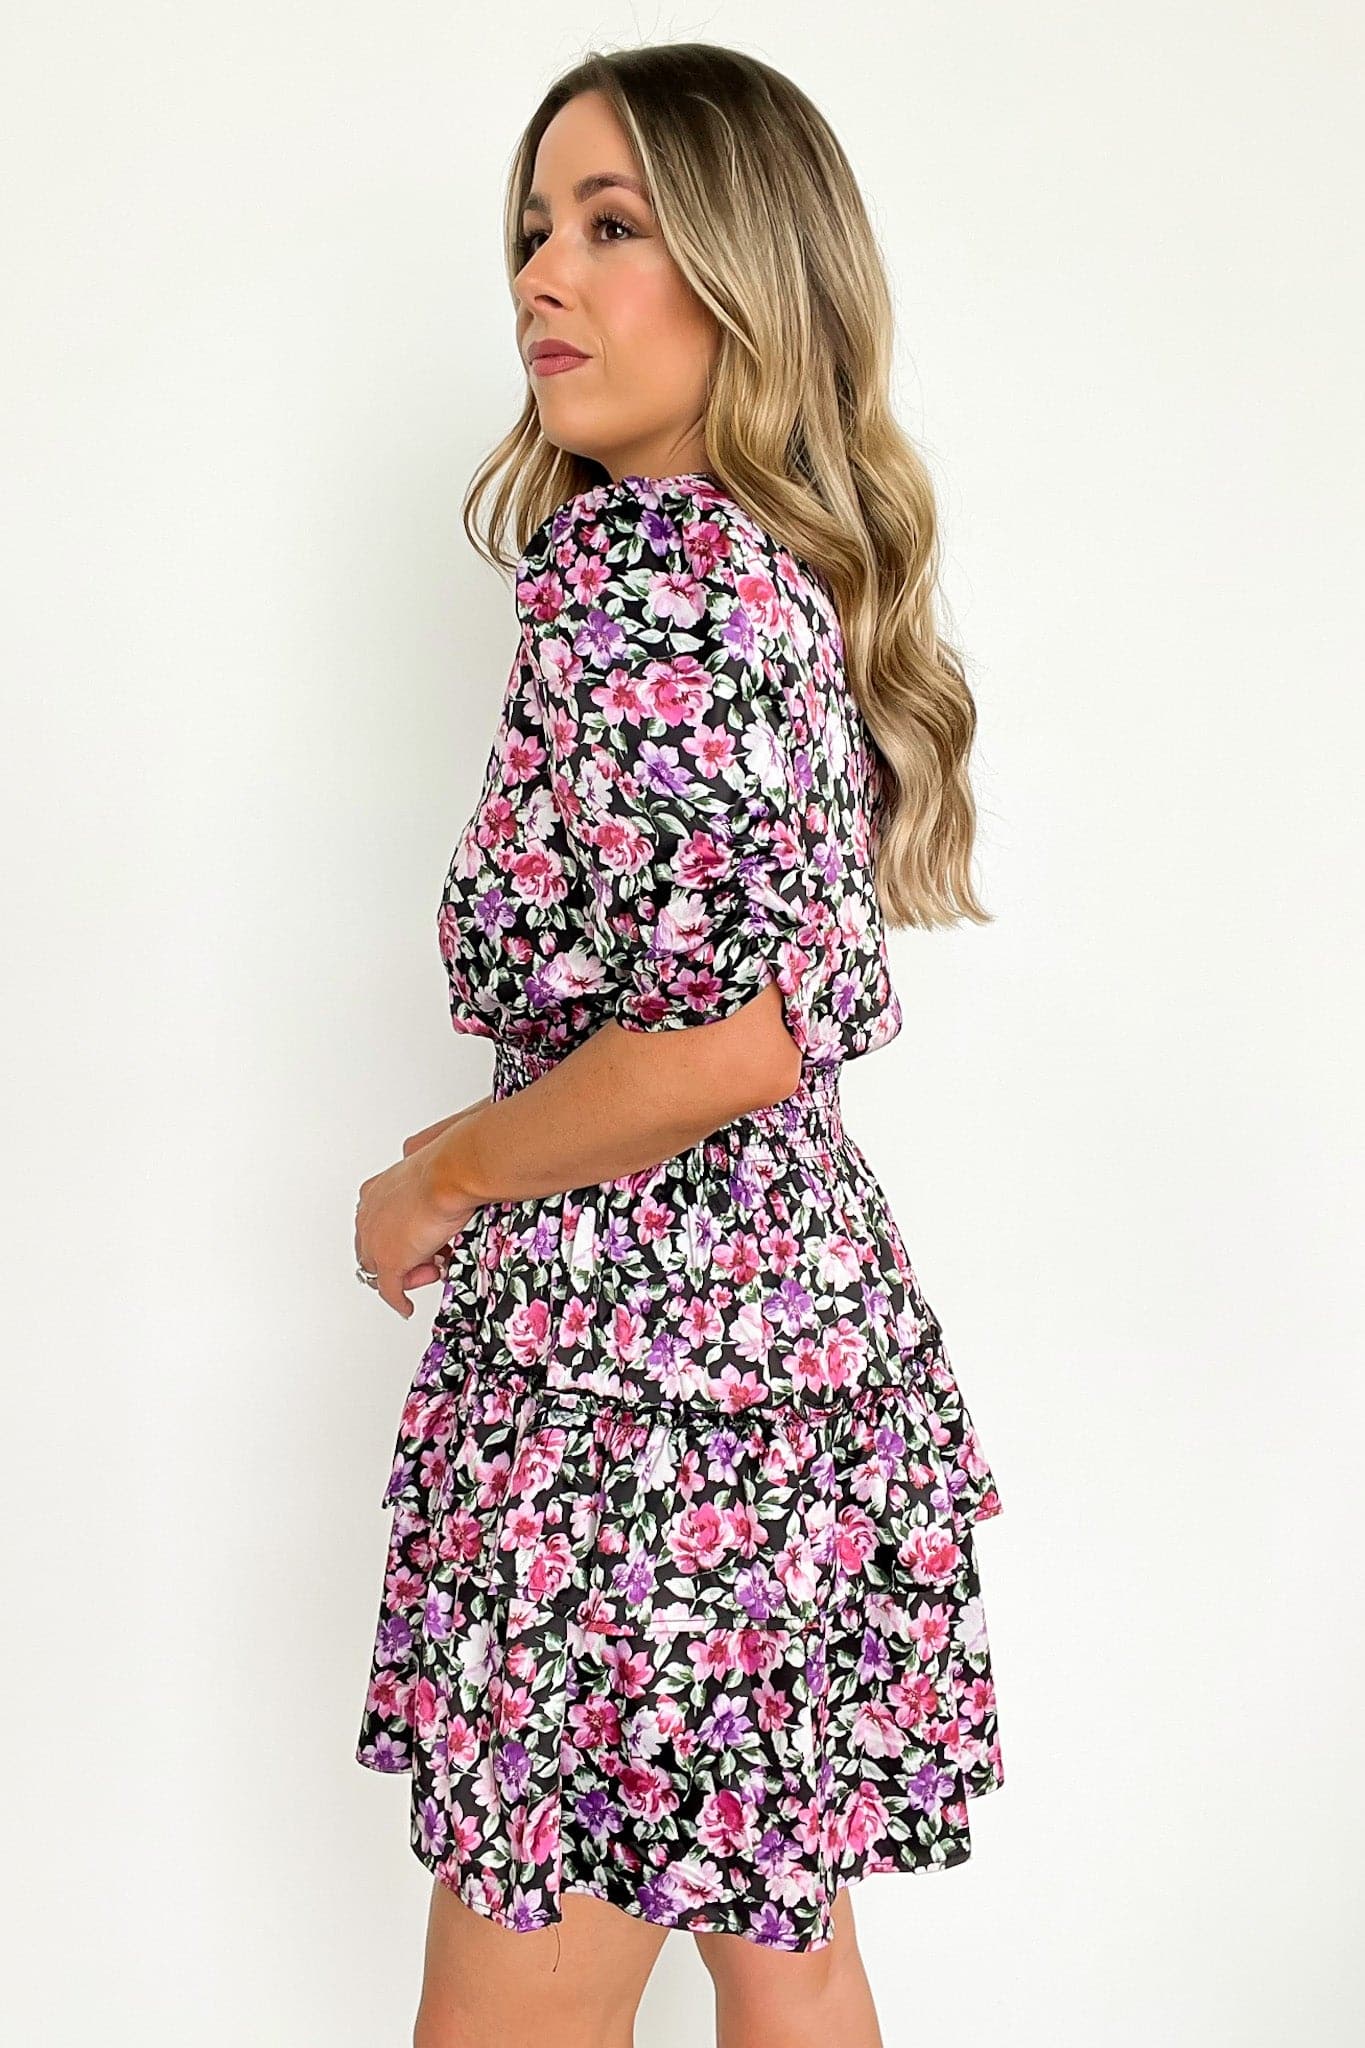  Serene Soiree Floral Print Ruffle Tiered Dress - FINAL SALE - Madison and Mallory